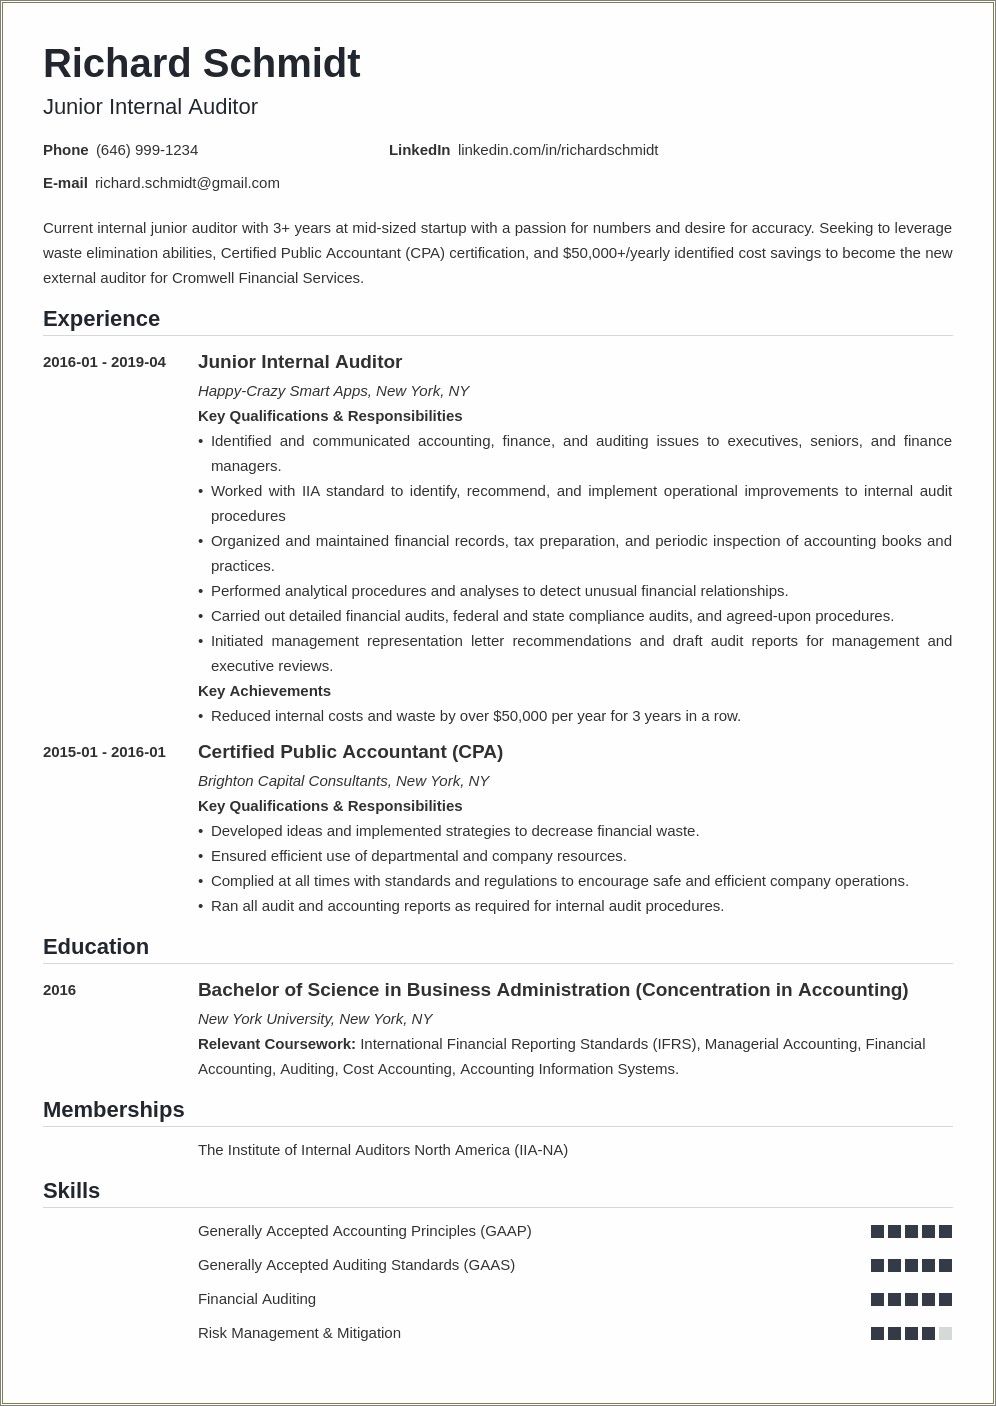 Examples Of Resume Summary For A Night Auditor